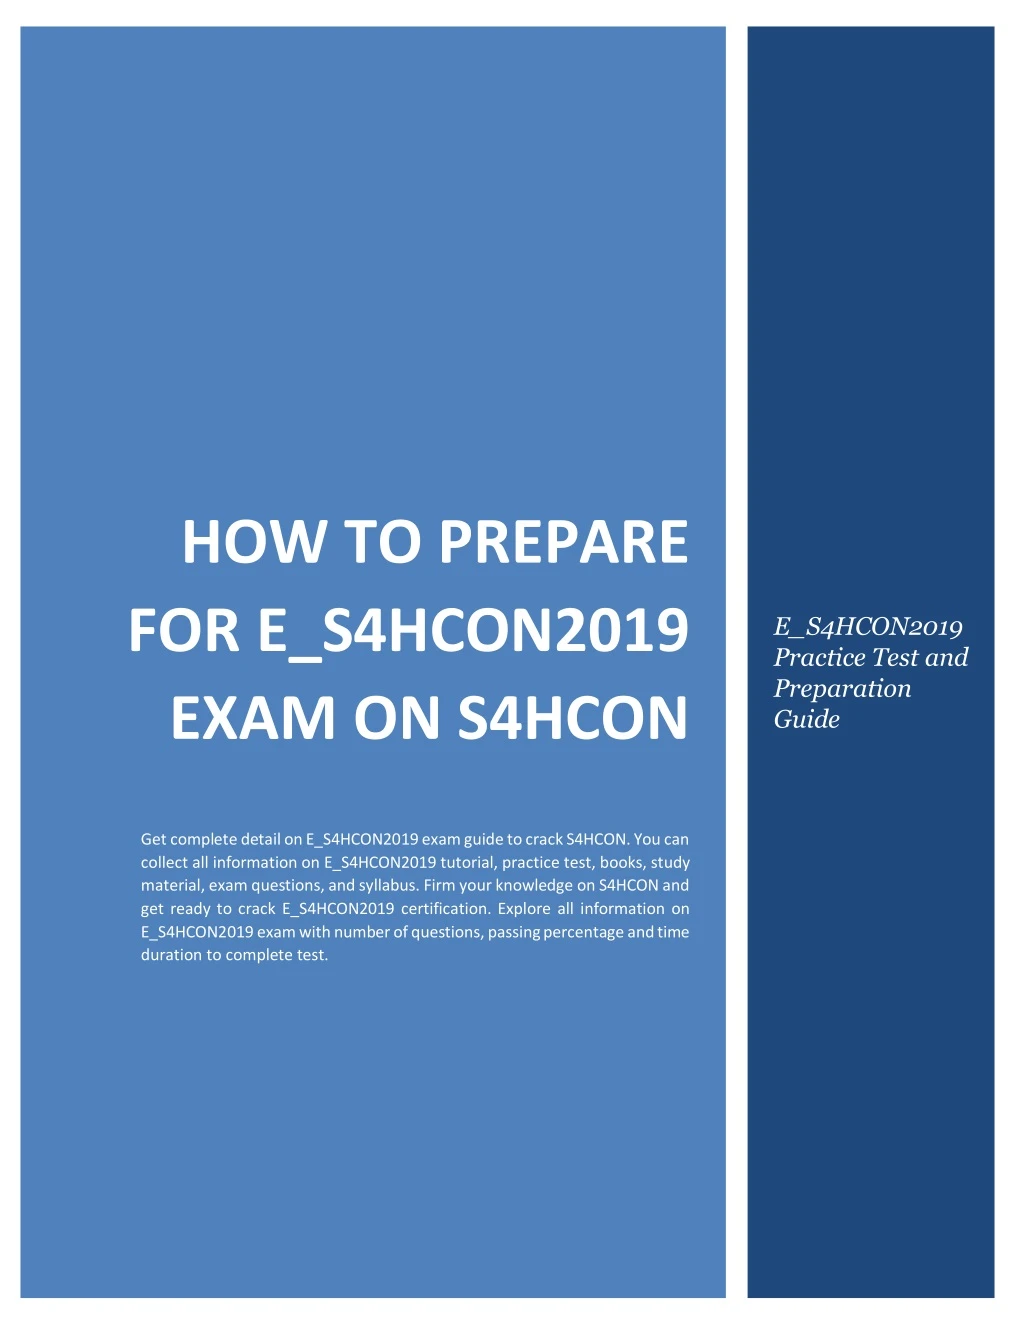 how to prepare for e s4hcon2019 exam on s4hcon